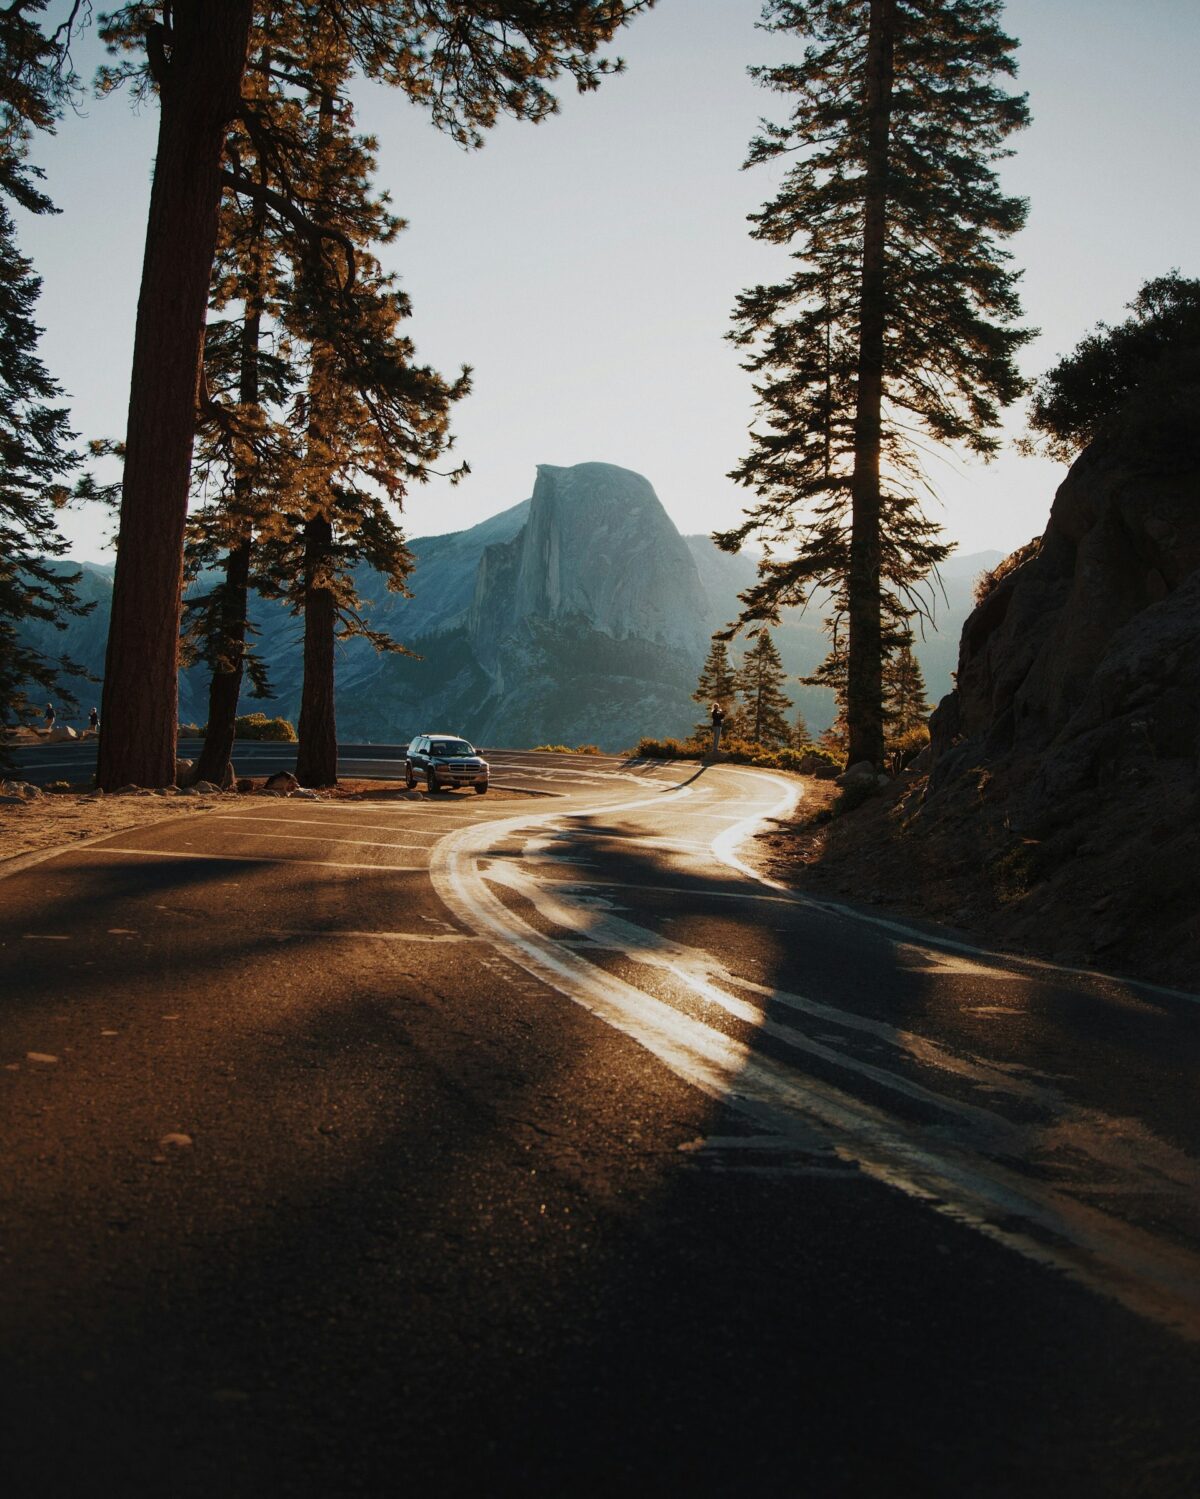 alt txt = "Lone car driving on a winding road surrounded by the sunrise and tall trees in California."